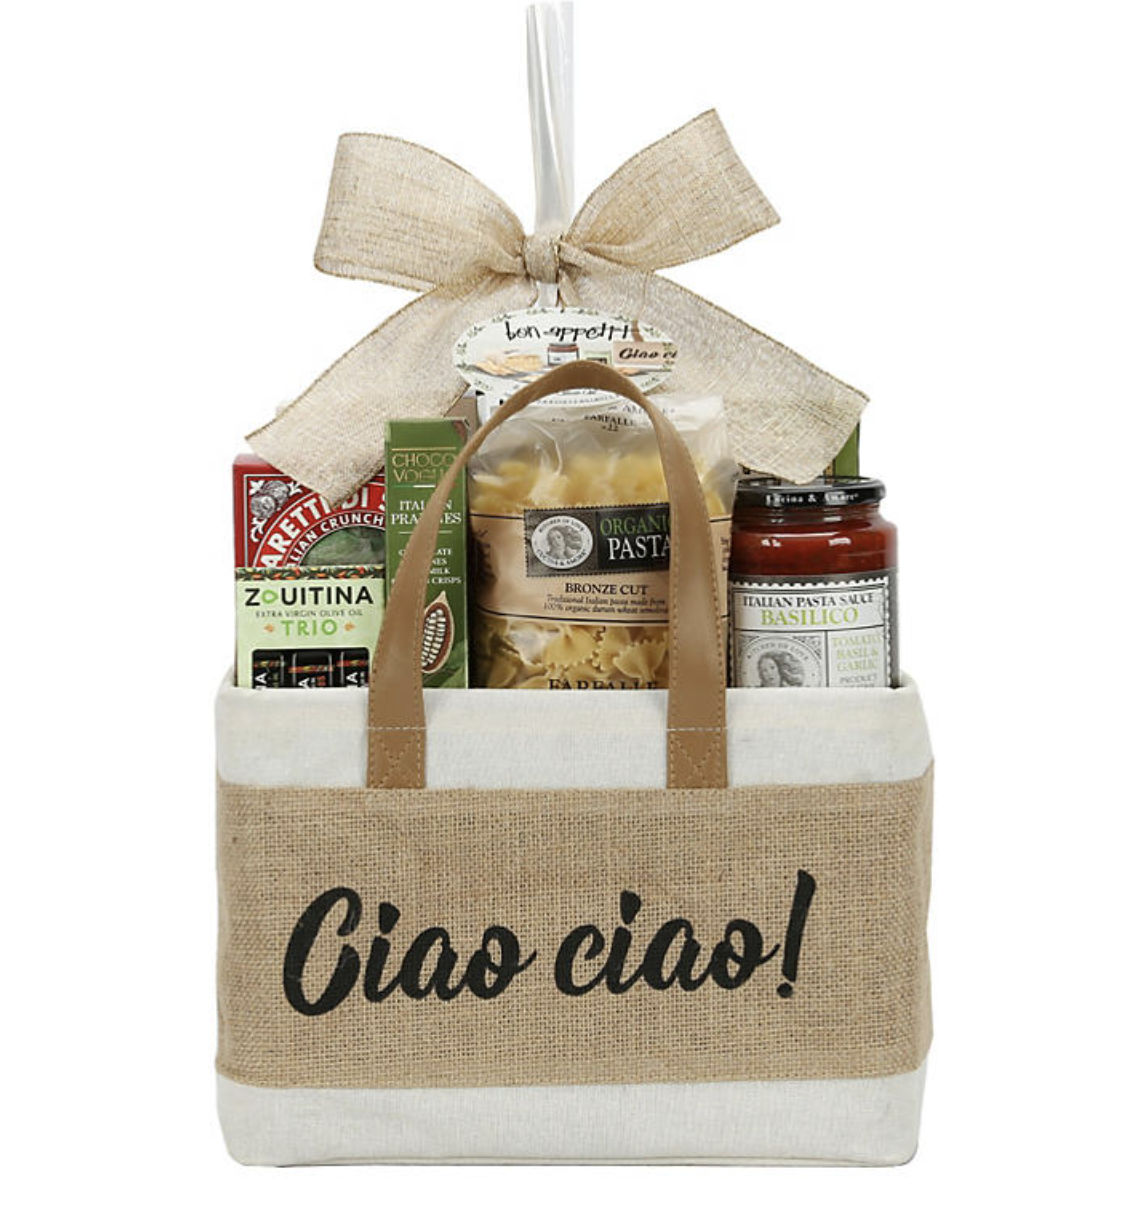 Ciao Ciao! tote containing pasta, breadsticks, pasta sauce, crackers, olive oil, truffles, and cookies